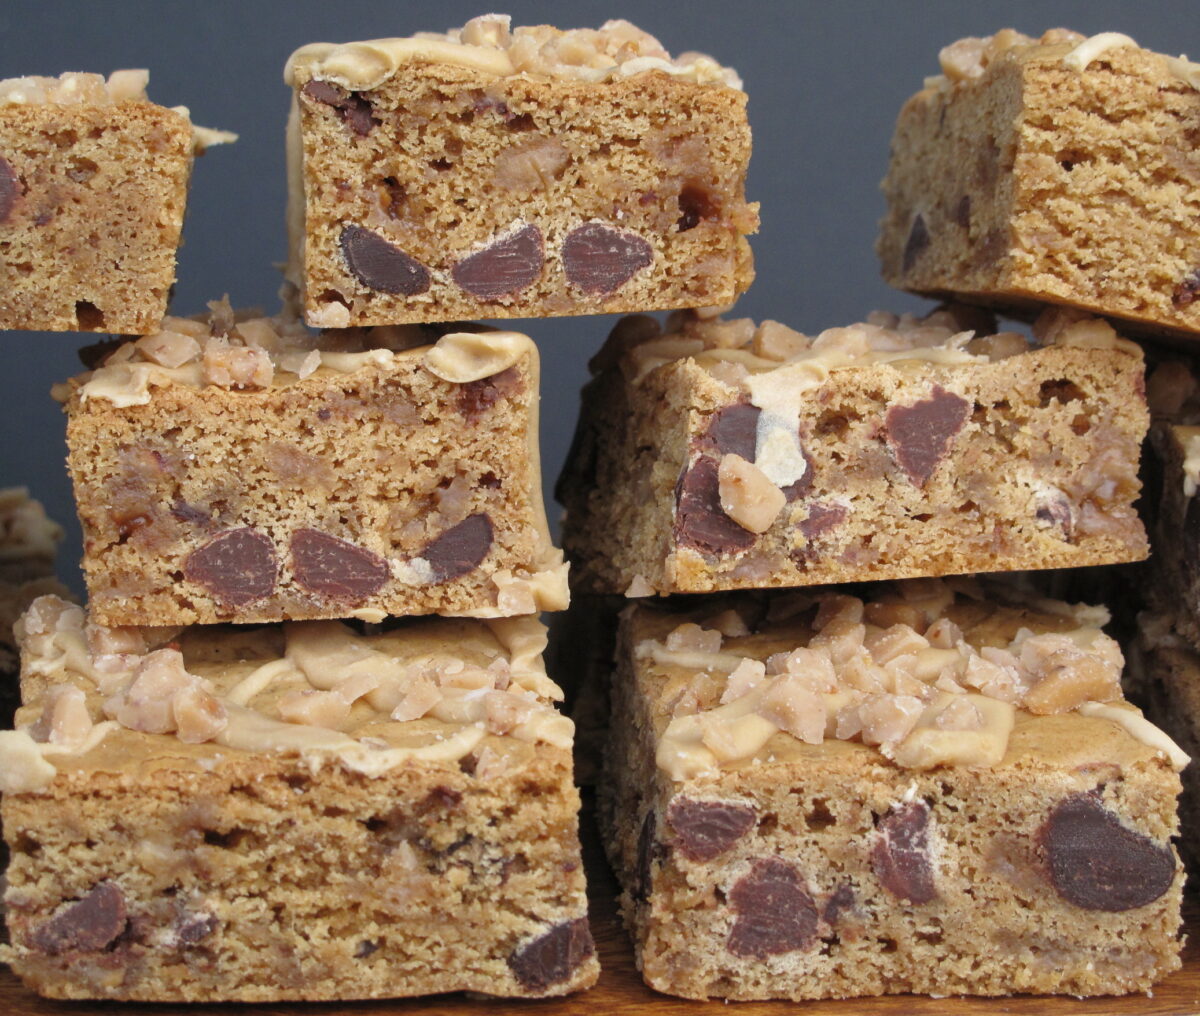 Stack of Biscoff Toffee Crunch Bars showing cut edges and chocolate and toffee bits inside.